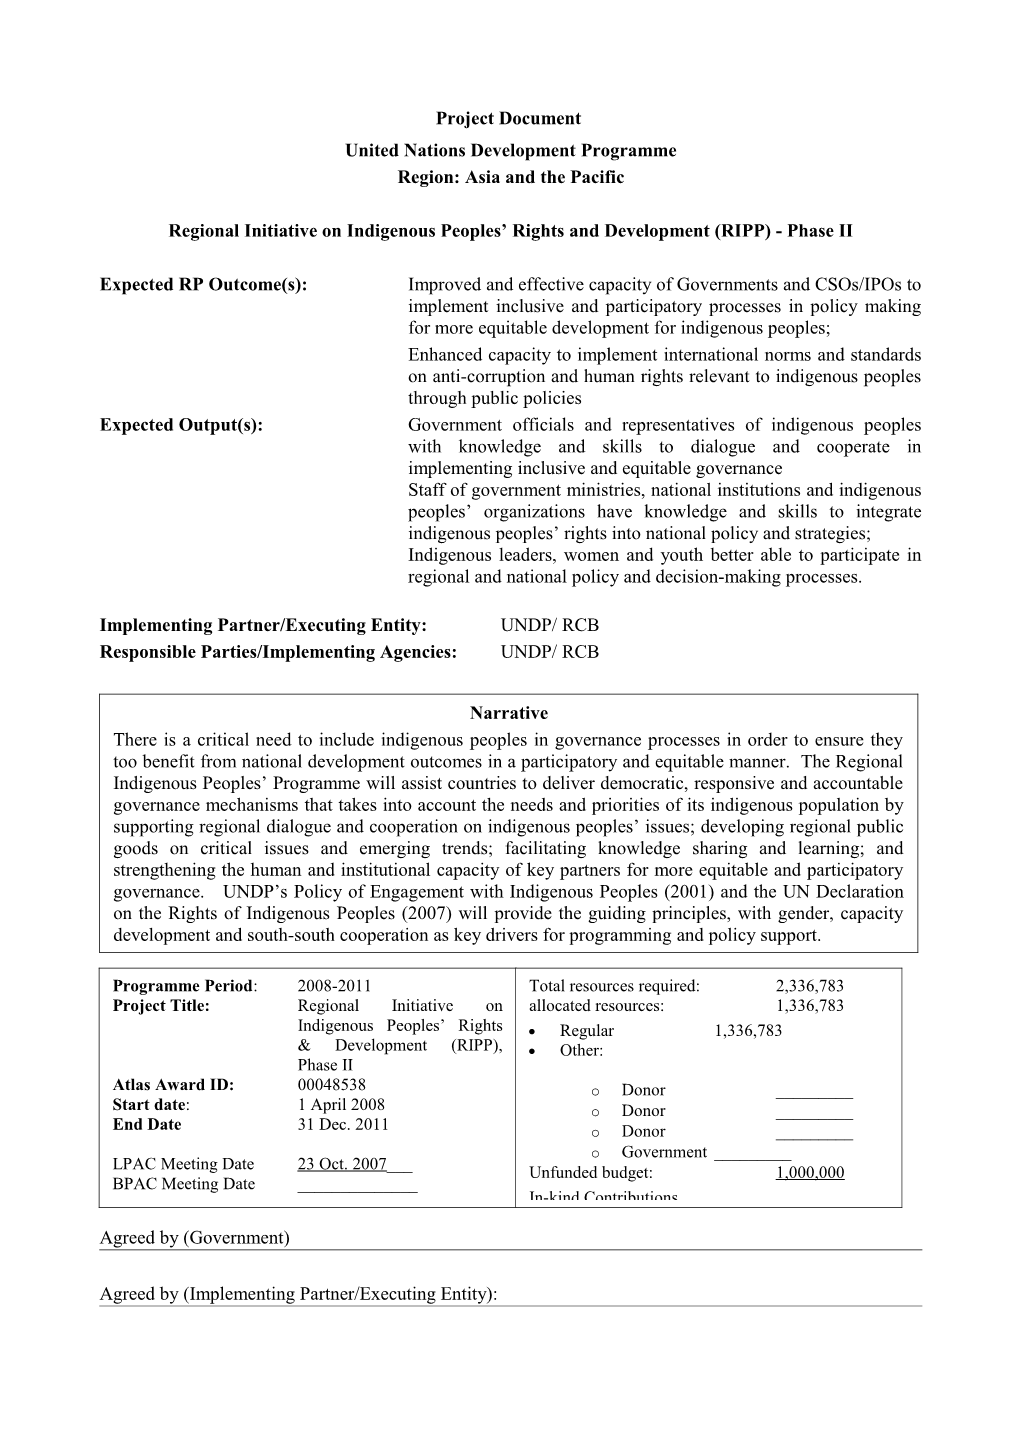 Project Document - Regional Indigenous Peoples Programme, Phase II